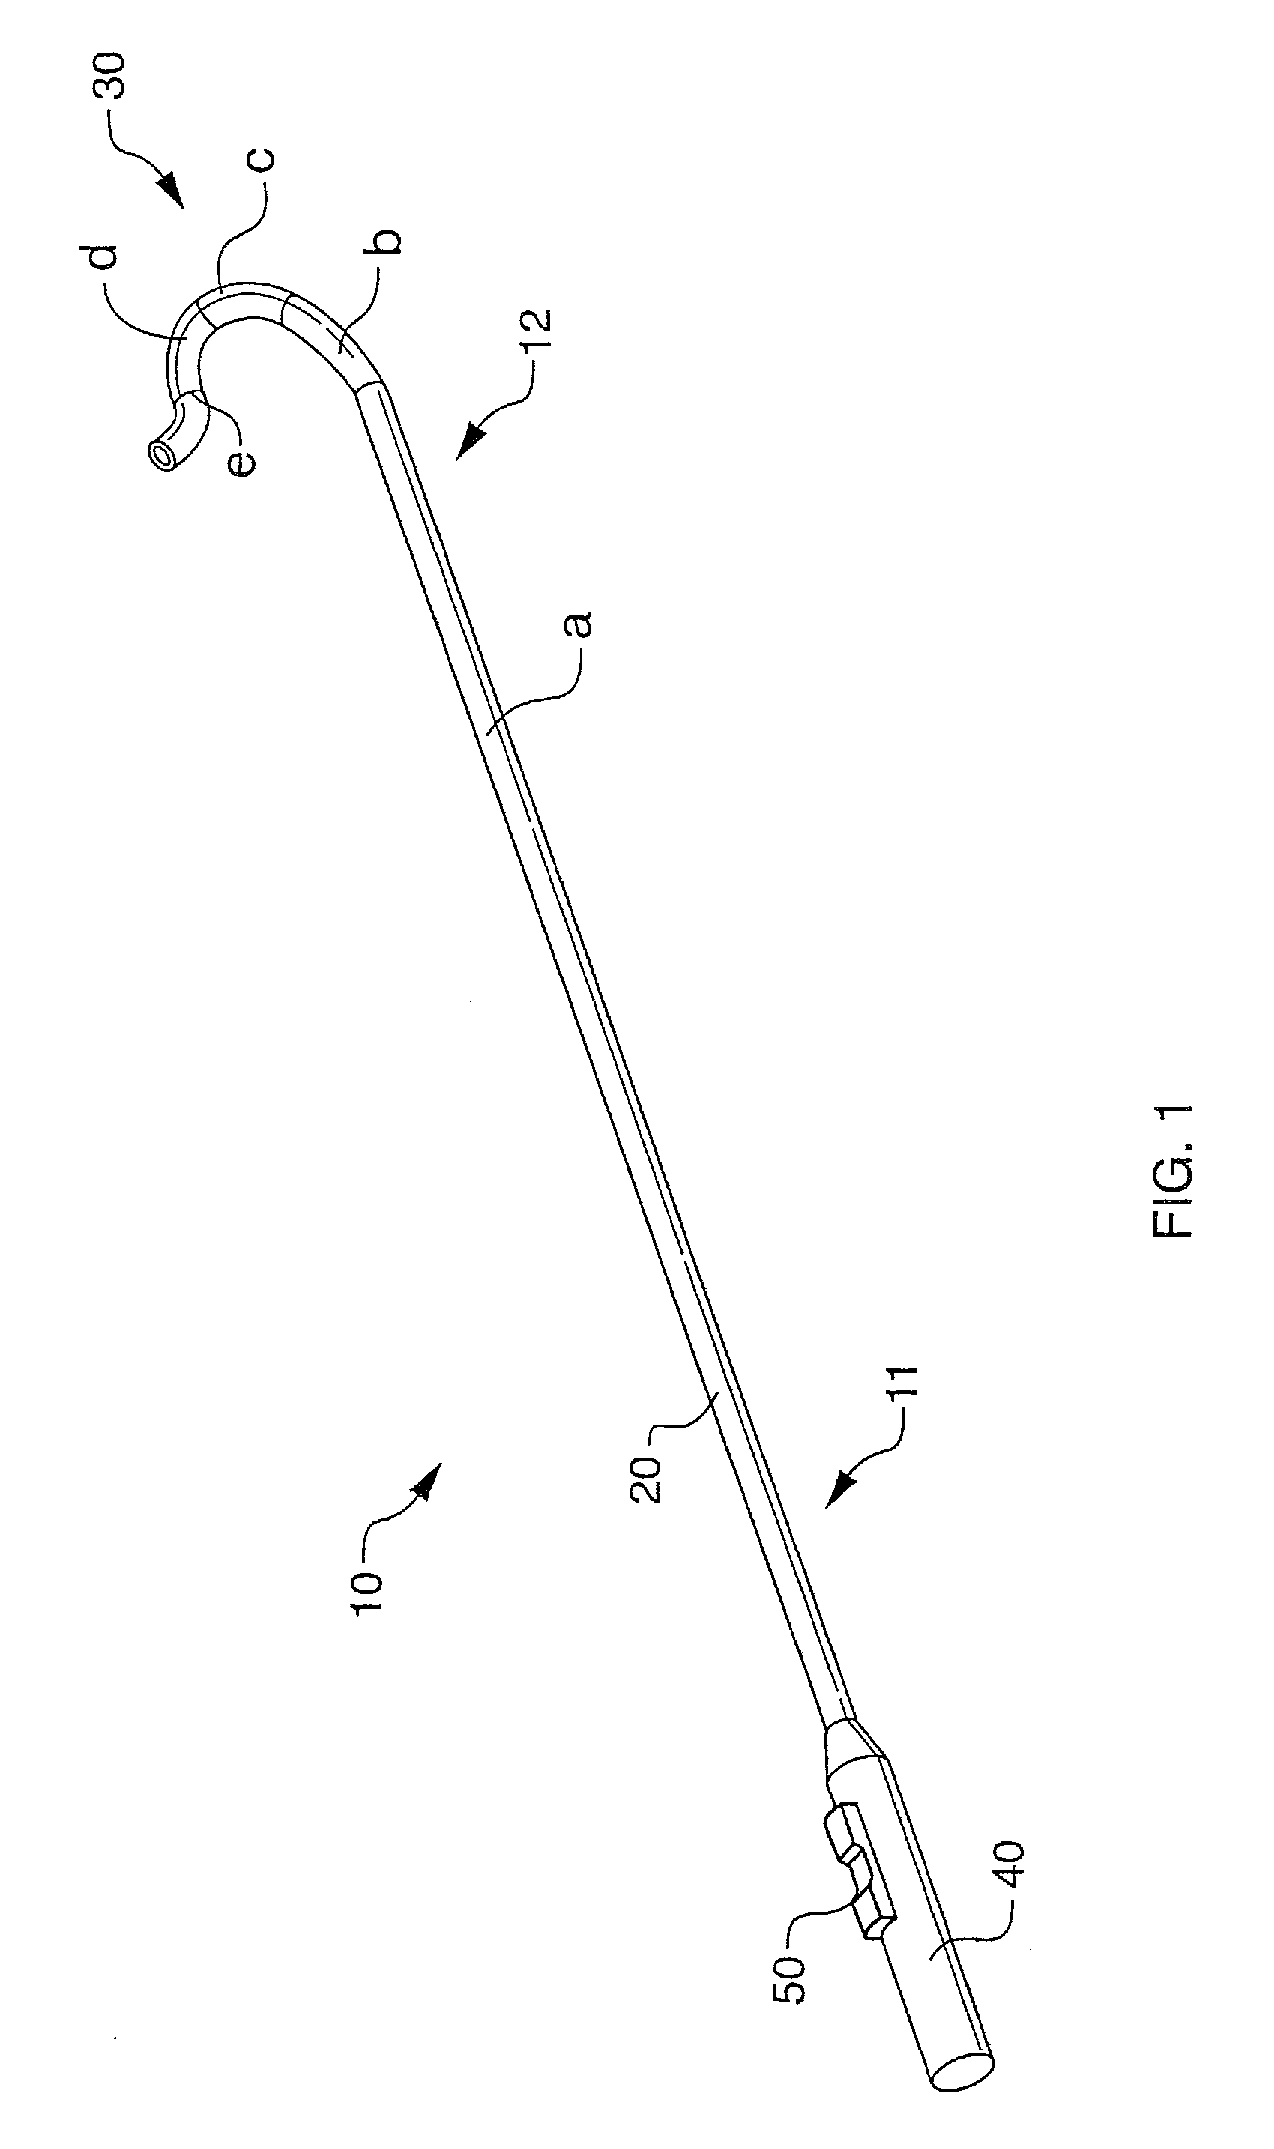 Ablation instrument having deflectable sheath catheters with out-of plane bent tip